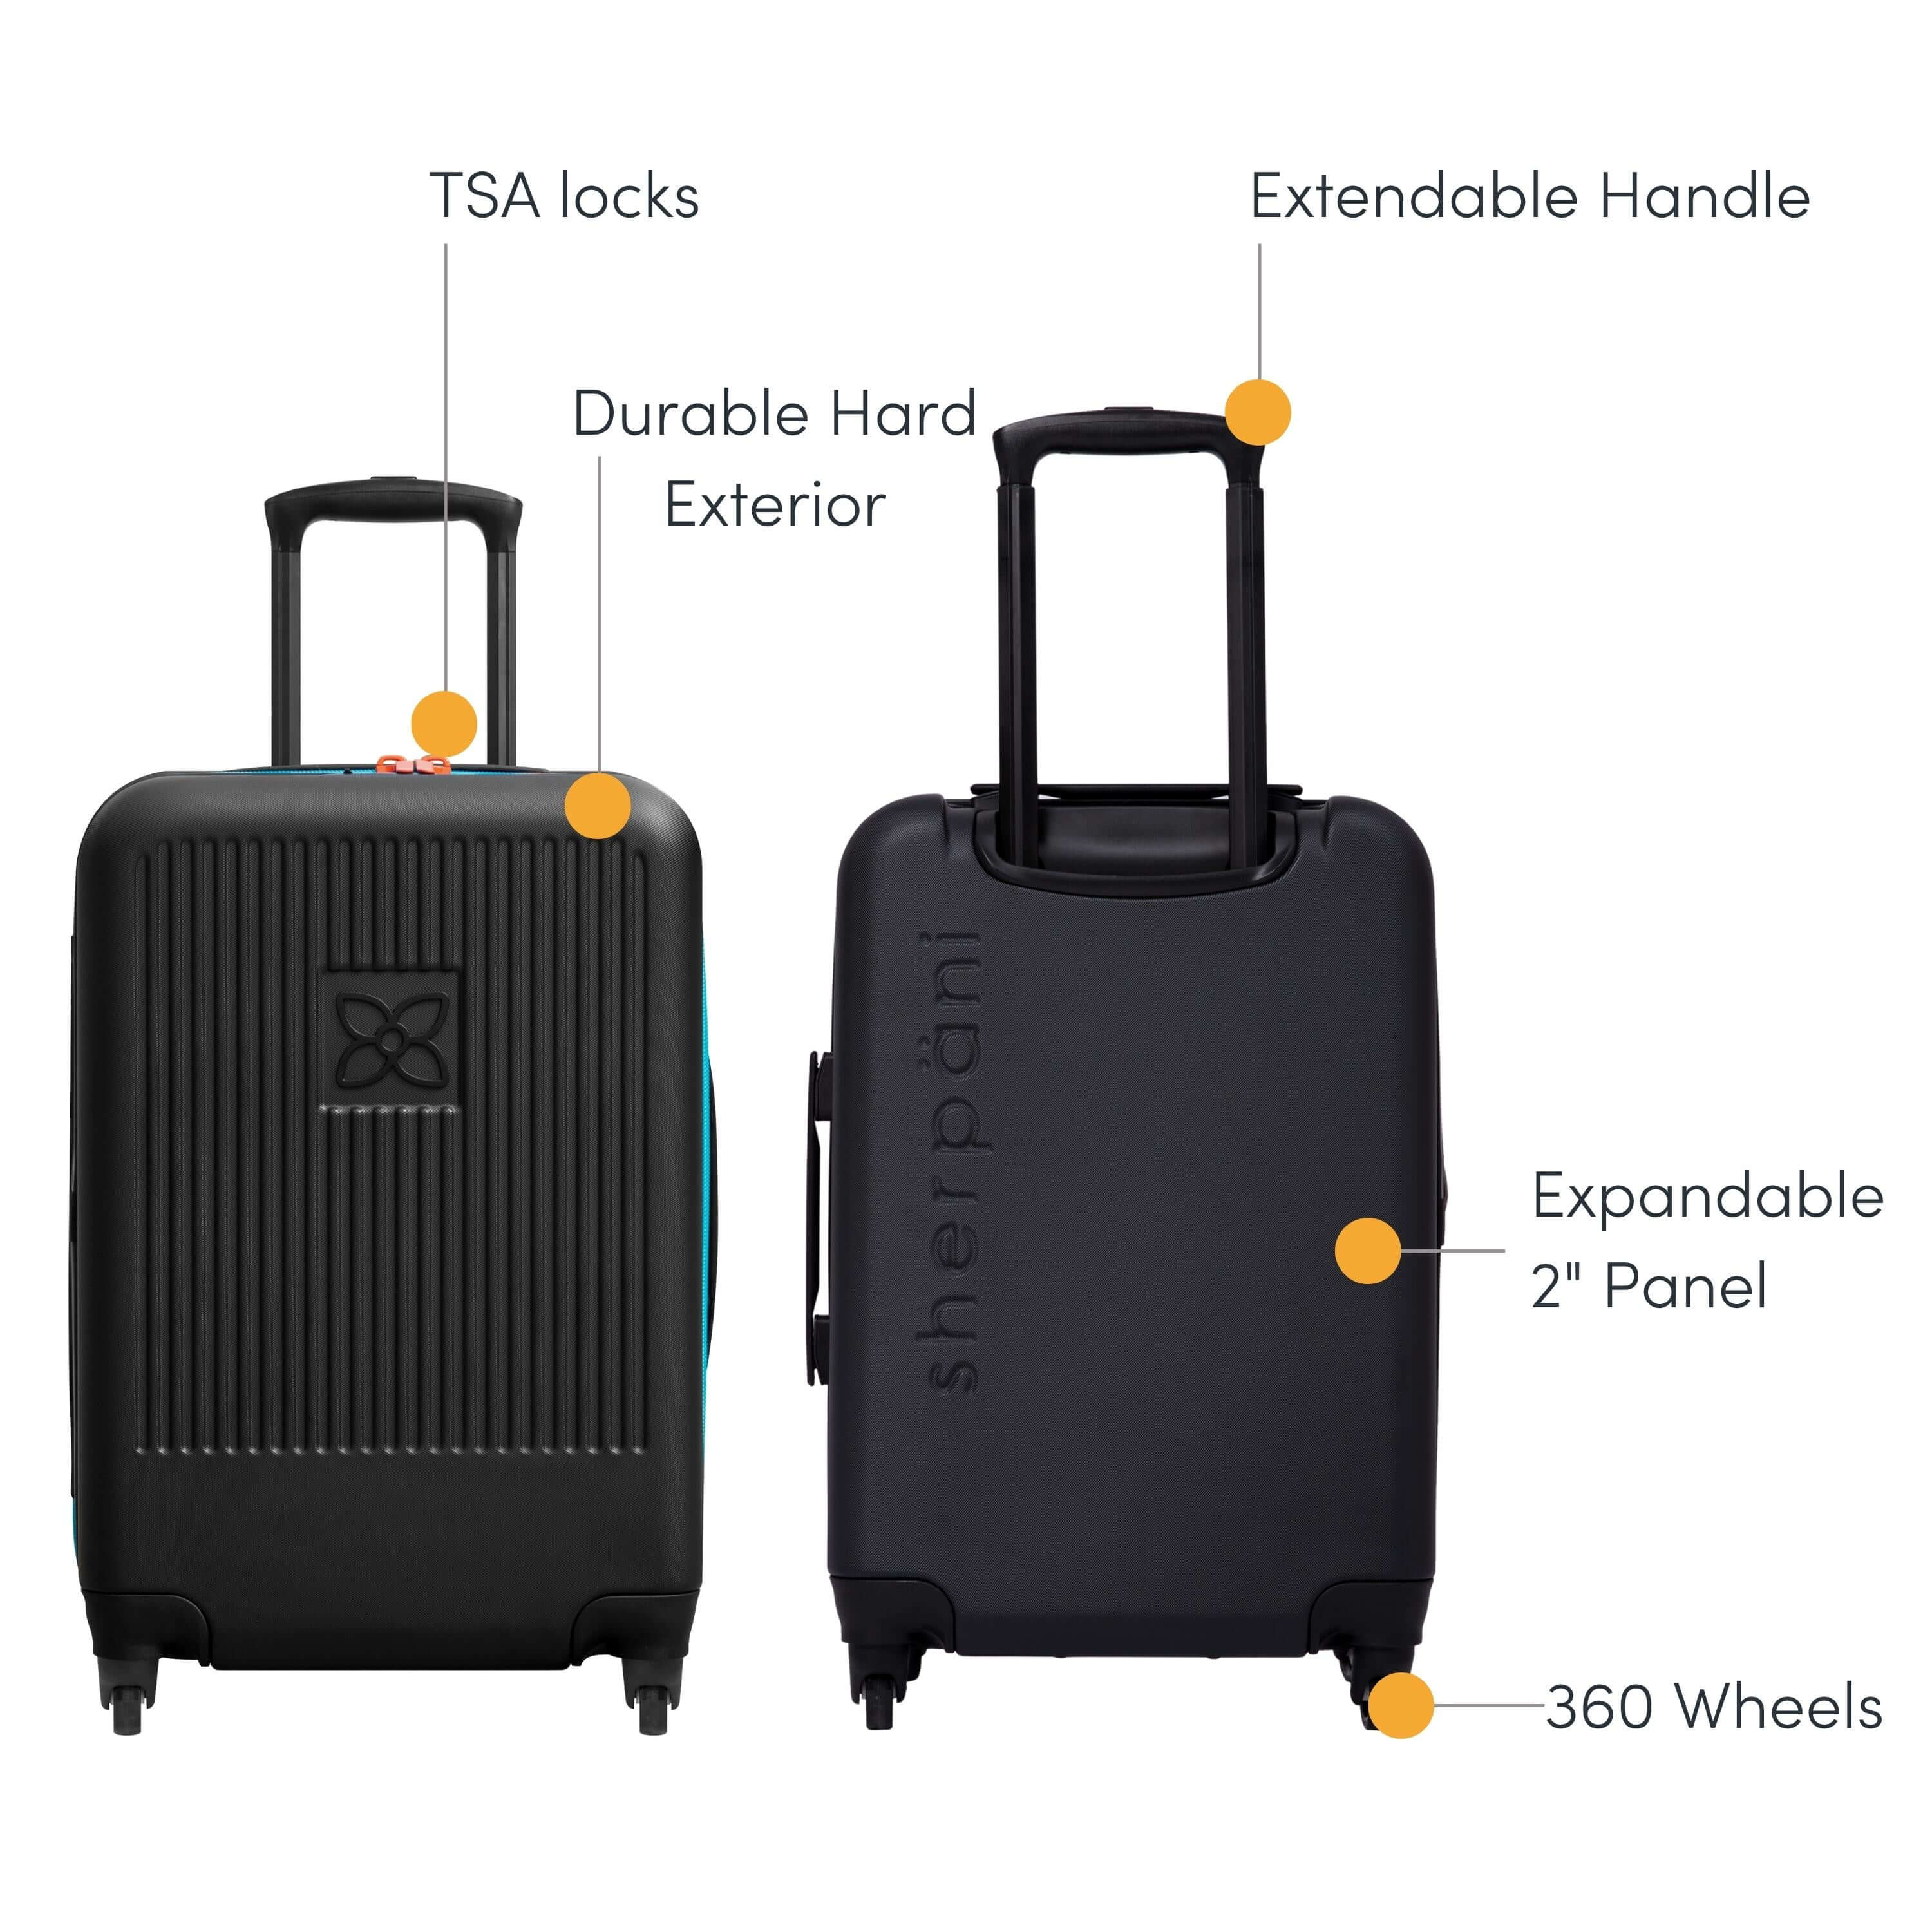 A graphic showcasing the following Meridian features: TSA-approved locking zippers, durable and uncrushable exterior, retractable luggage handle, 2-inch zipper expander, four 360-degree spinner wheels and an ultralightweight design.